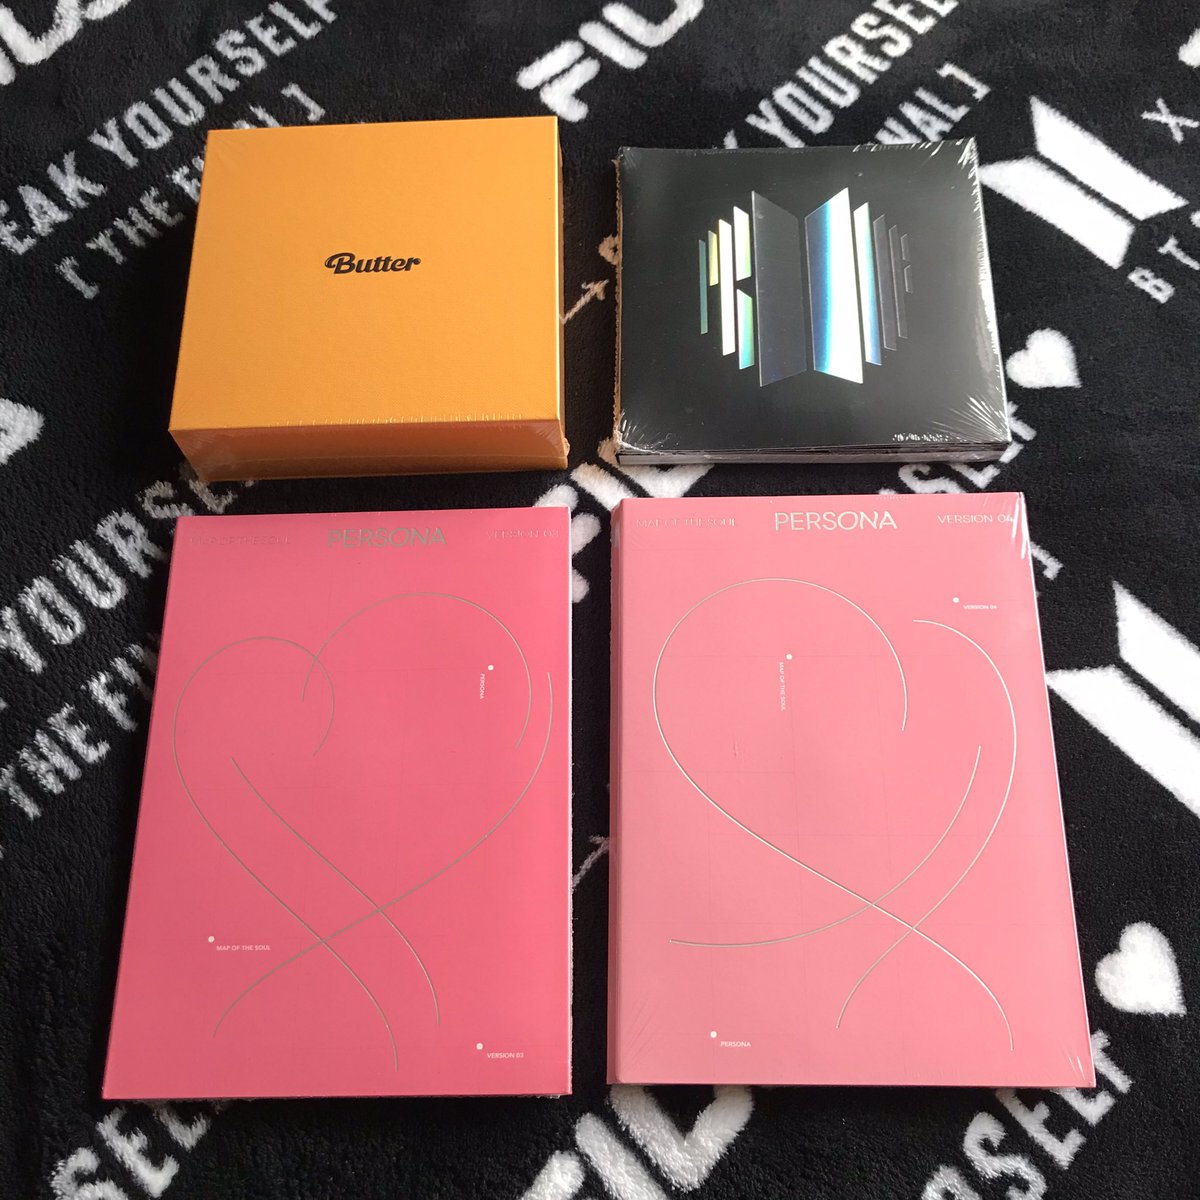 [ ON HAND ] ‼️ SALE ‼️ BTS ALBUMS ㅡ BUTTER Cream Ver ㅡ PROOF Compact Ver ㅡ MOTS Persona Ver 3 ㅡ MOTS Persona Ver 4 > ₱500 EACH > Official > Sealed DM to avail! ⌗ wts lfb ph album map of the soul version rm jin suga jhope jimin v jungkook